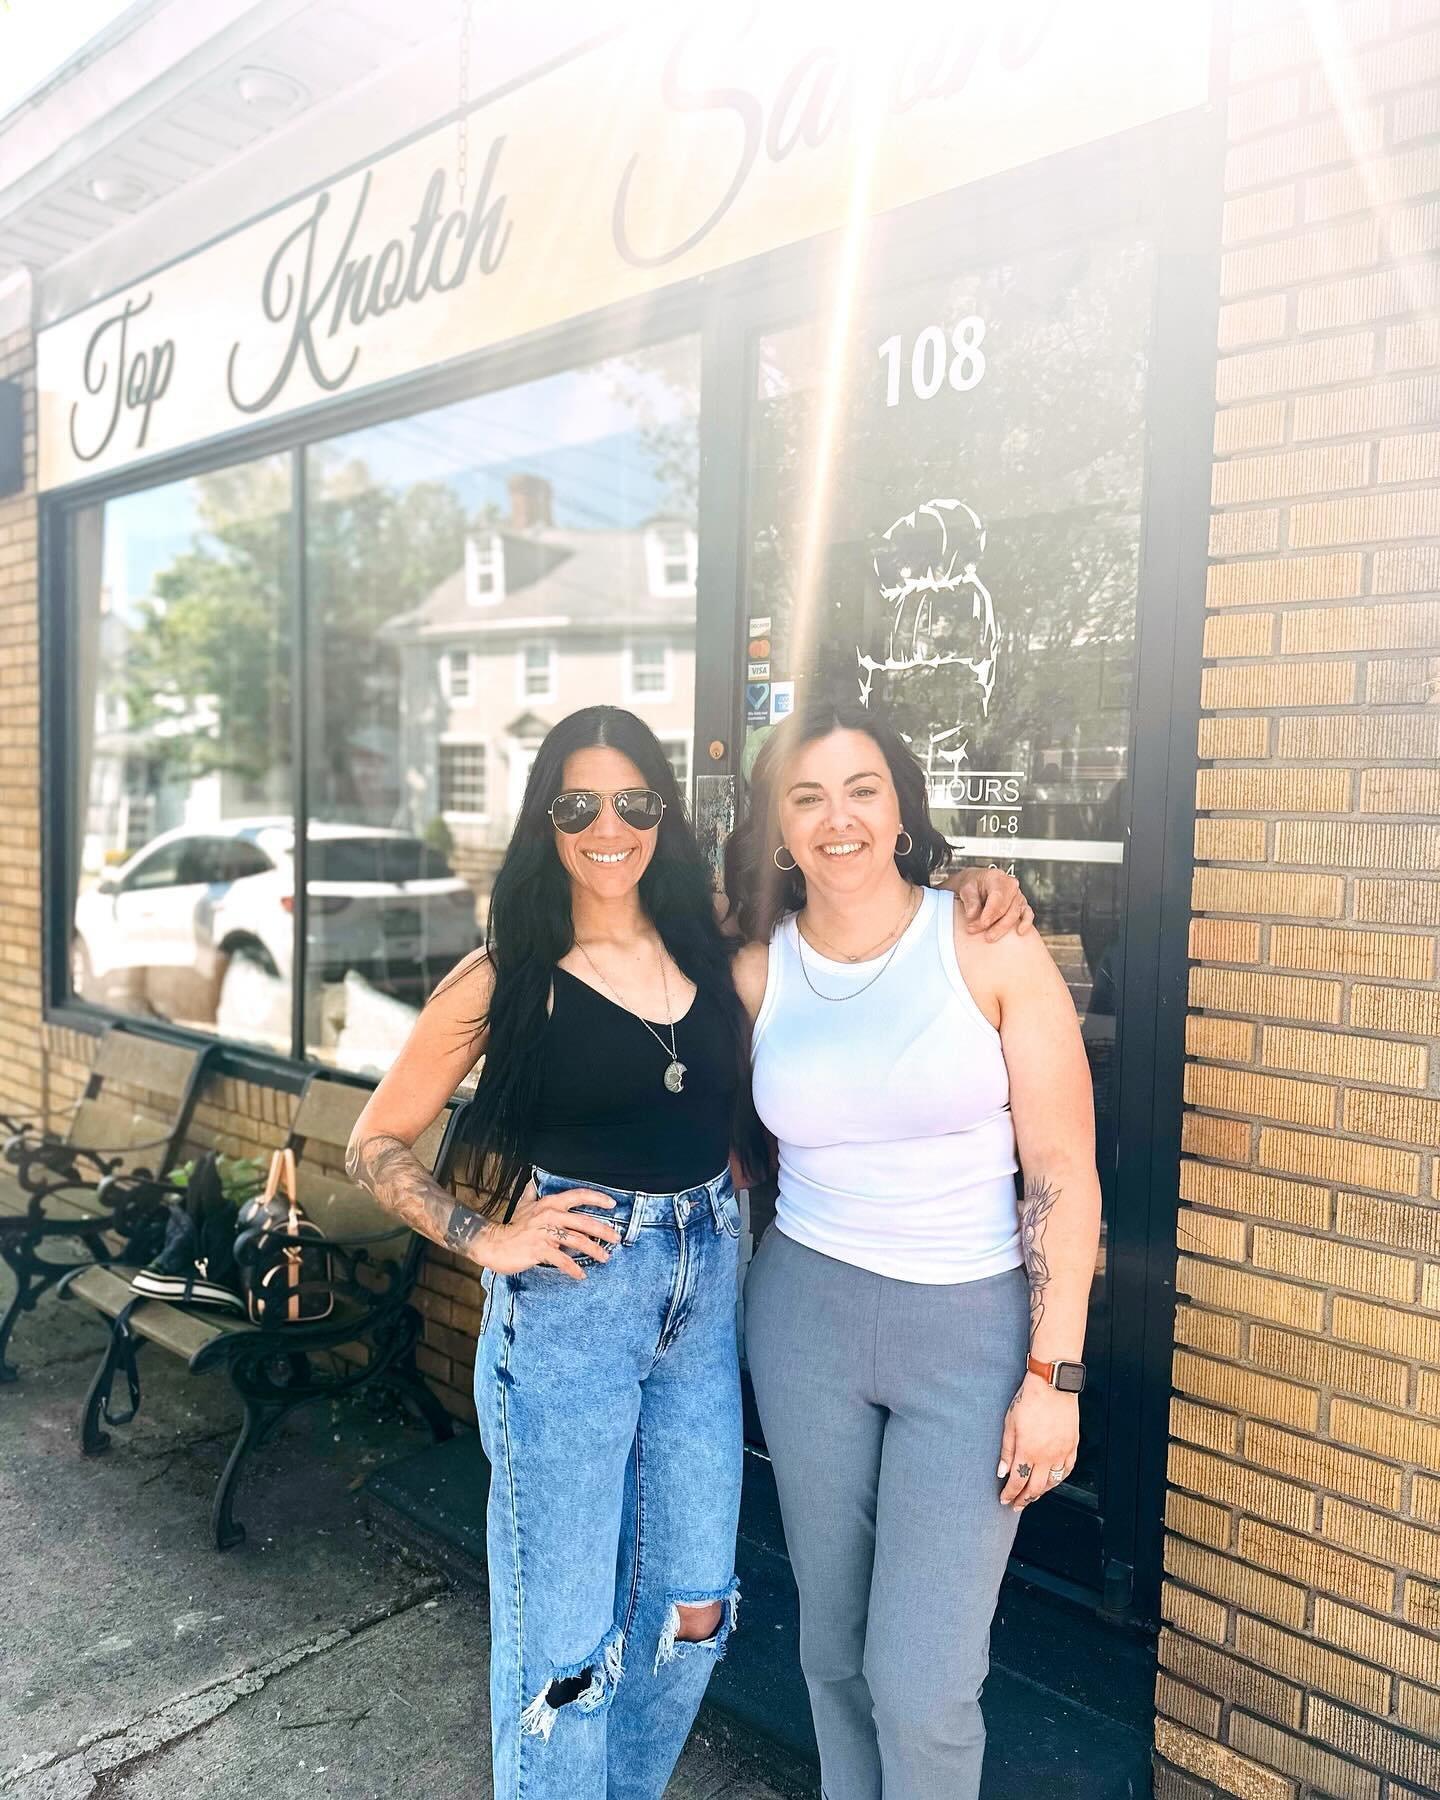 Top Knotch Salon is officially under new ownership! 🥳🎊🍾 
.
Thank you to all of our clients and staff who have made the past 4 years a groundbreaking success! We are so excited for Kelly &amp; Alexis to take on this new chapter; and continue to pro